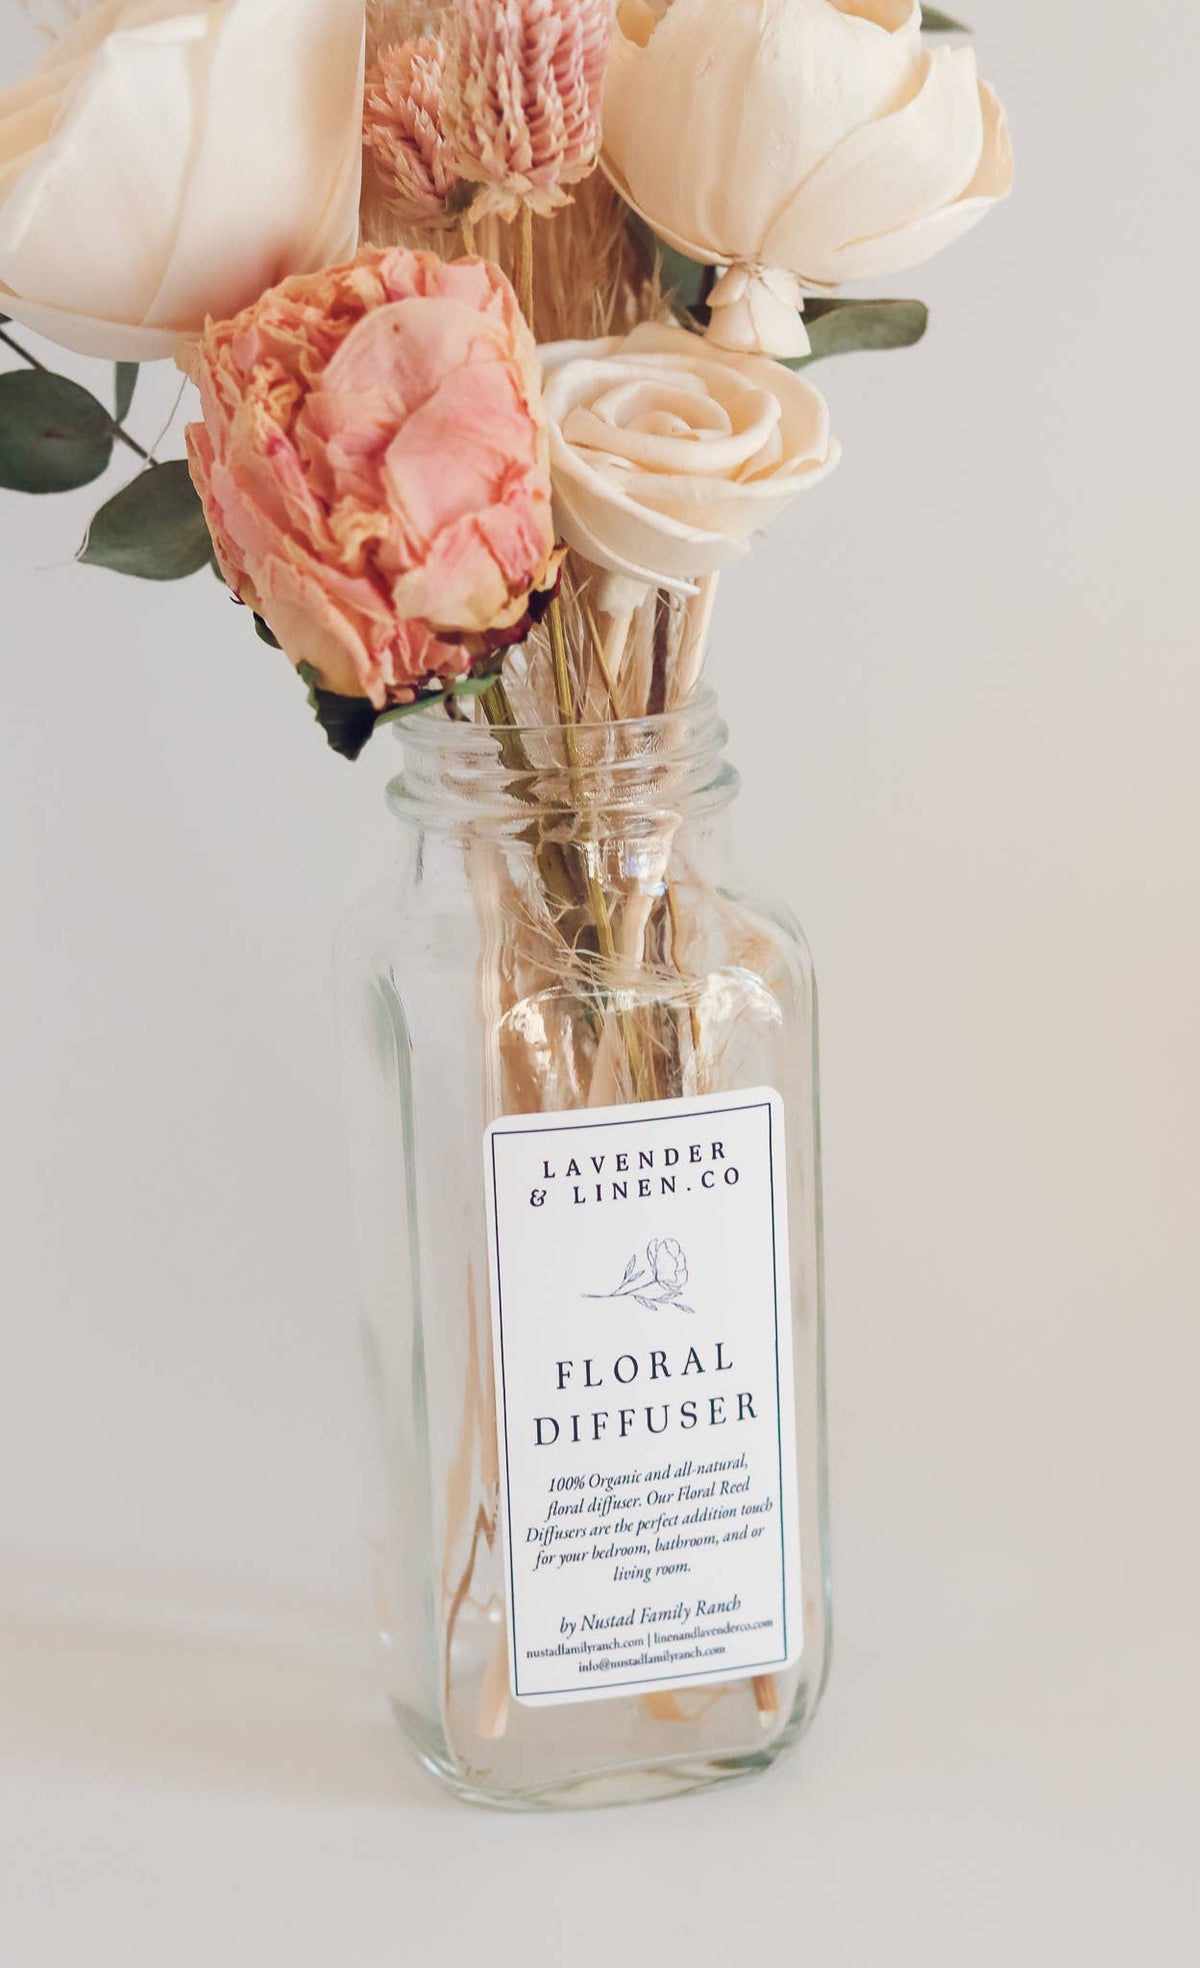 Nustad Family Ranch Tuberose & Honey Reed Diffuser with Pink Peonies and Pampas